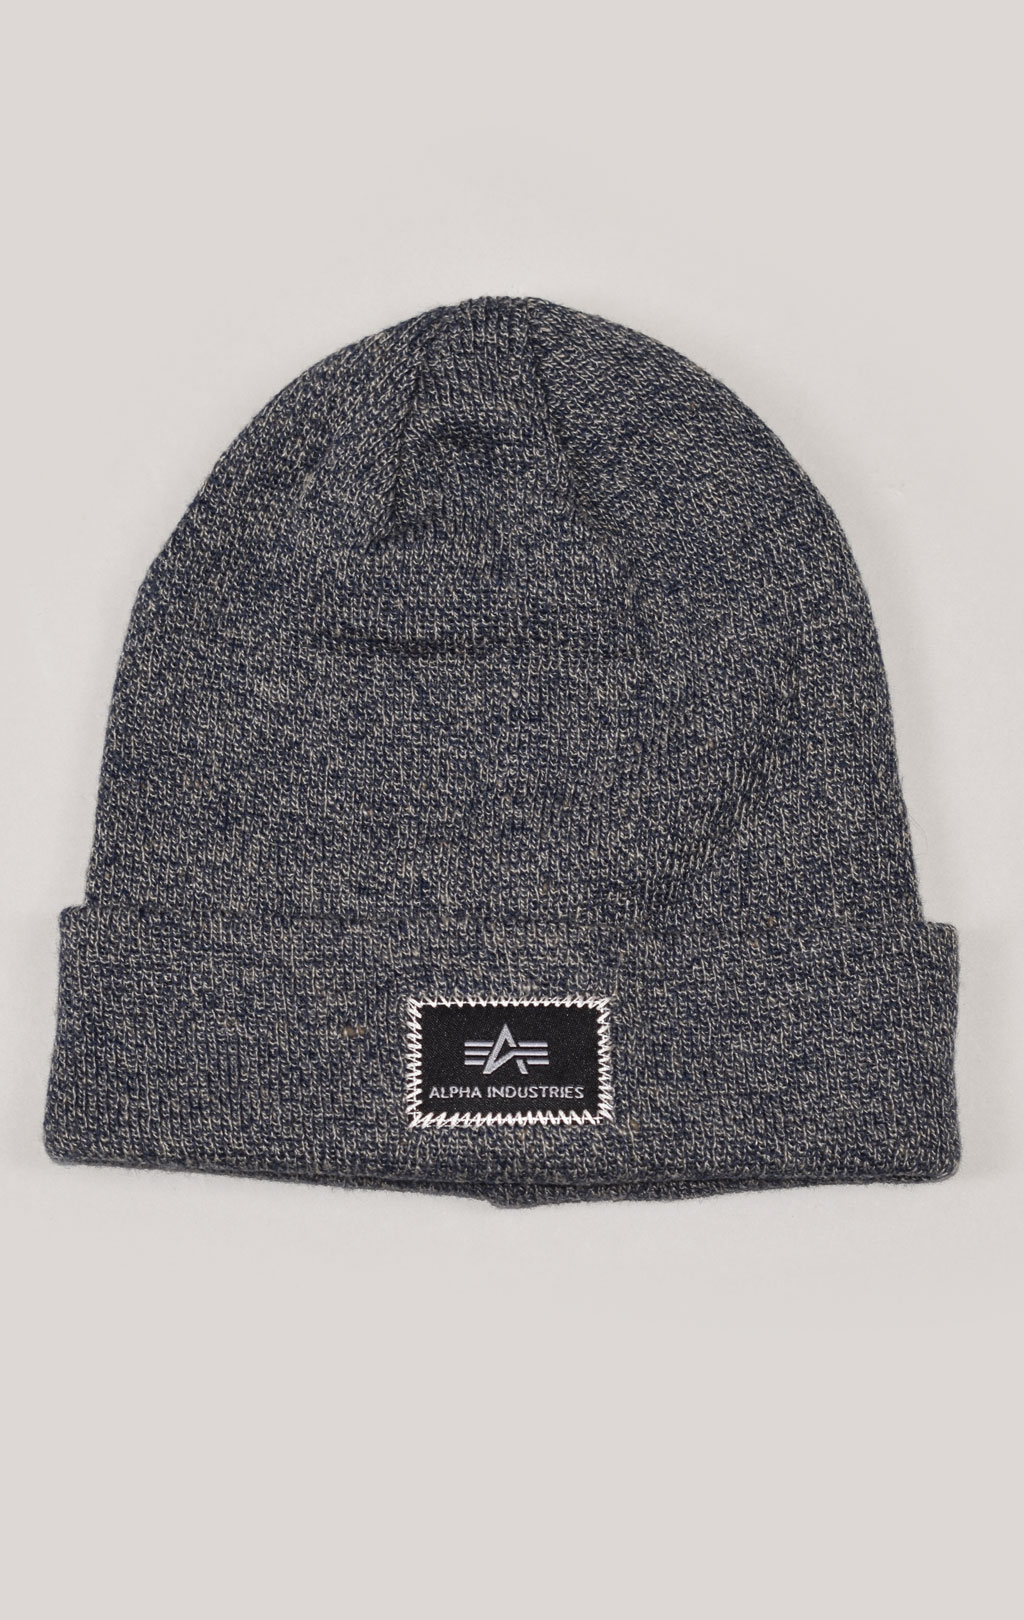 Шапка ALPHA INDUSTRIES X-FIT BEANIE charcoal heather 